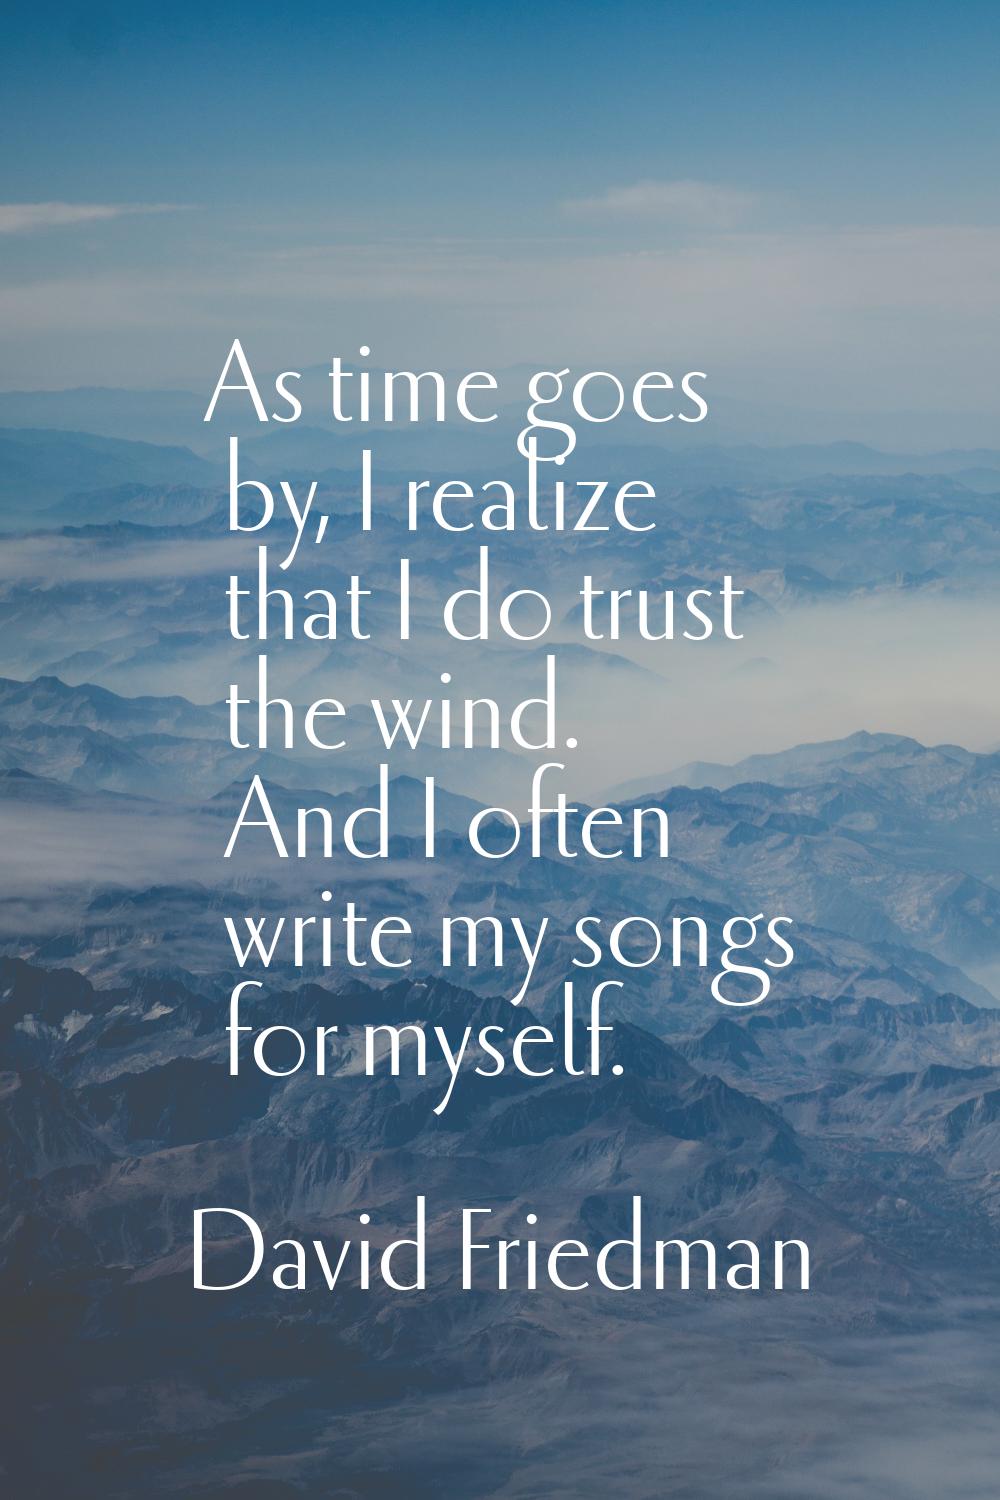 As time goes by, I realize that I do trust the wind. And I often write my songs for myself.